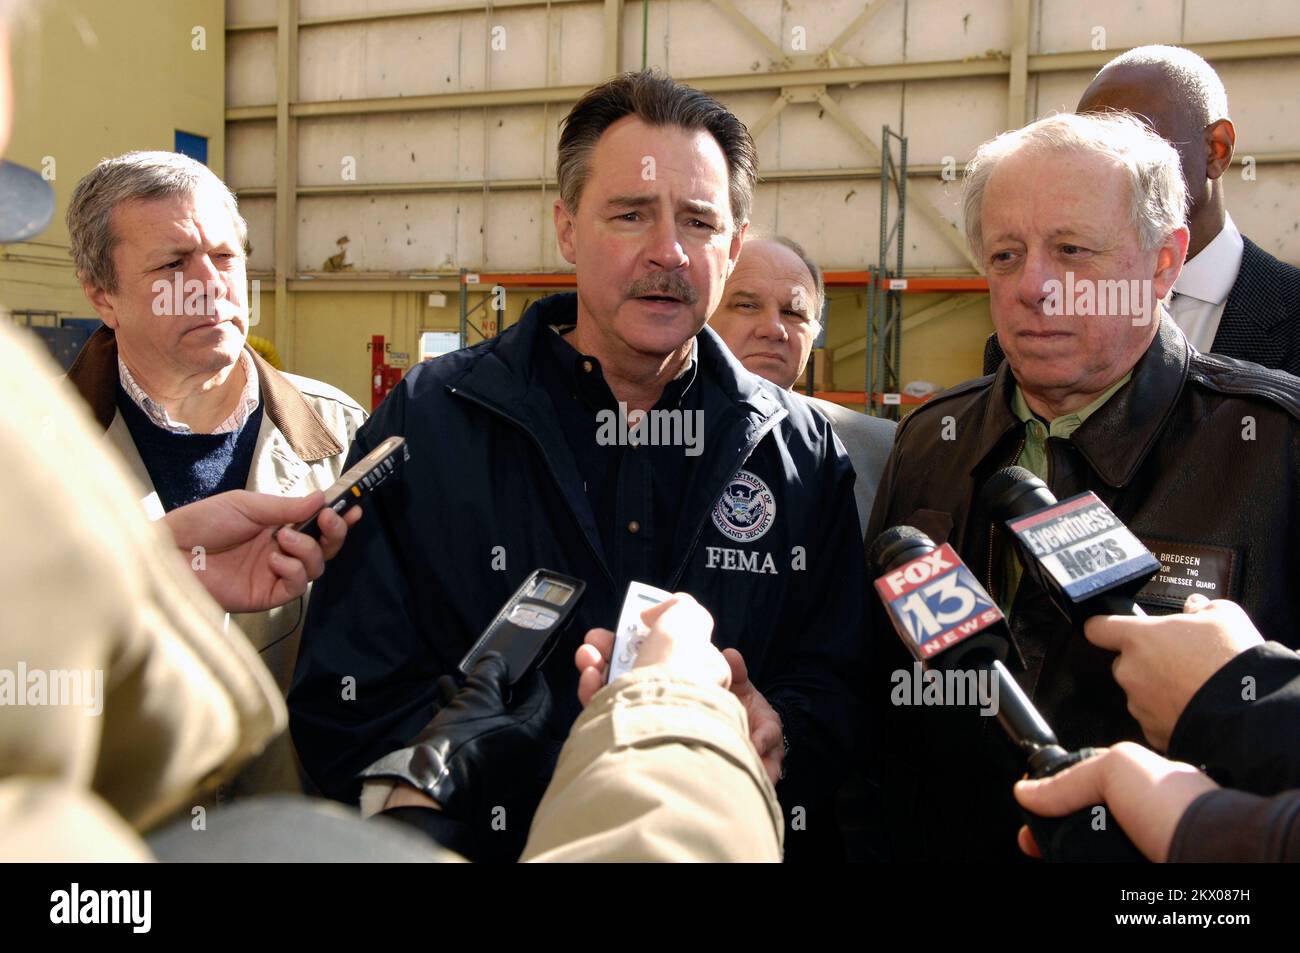 Severe Storms, Tornadoes, Straight-line Winds, and Flooding,  Memphis, TN, 02/07/2008   FEMA Administrator David Paulison, left and Tennessee Governor Phil Bredesen talk to reporters in the Pinnacle hanger at the Memphis airport. Paulison was there to tour the damage from the recent tornado.. Photographs Relating to Disasters and Emergency Management Programs, Activities, and Officials Stock Photo